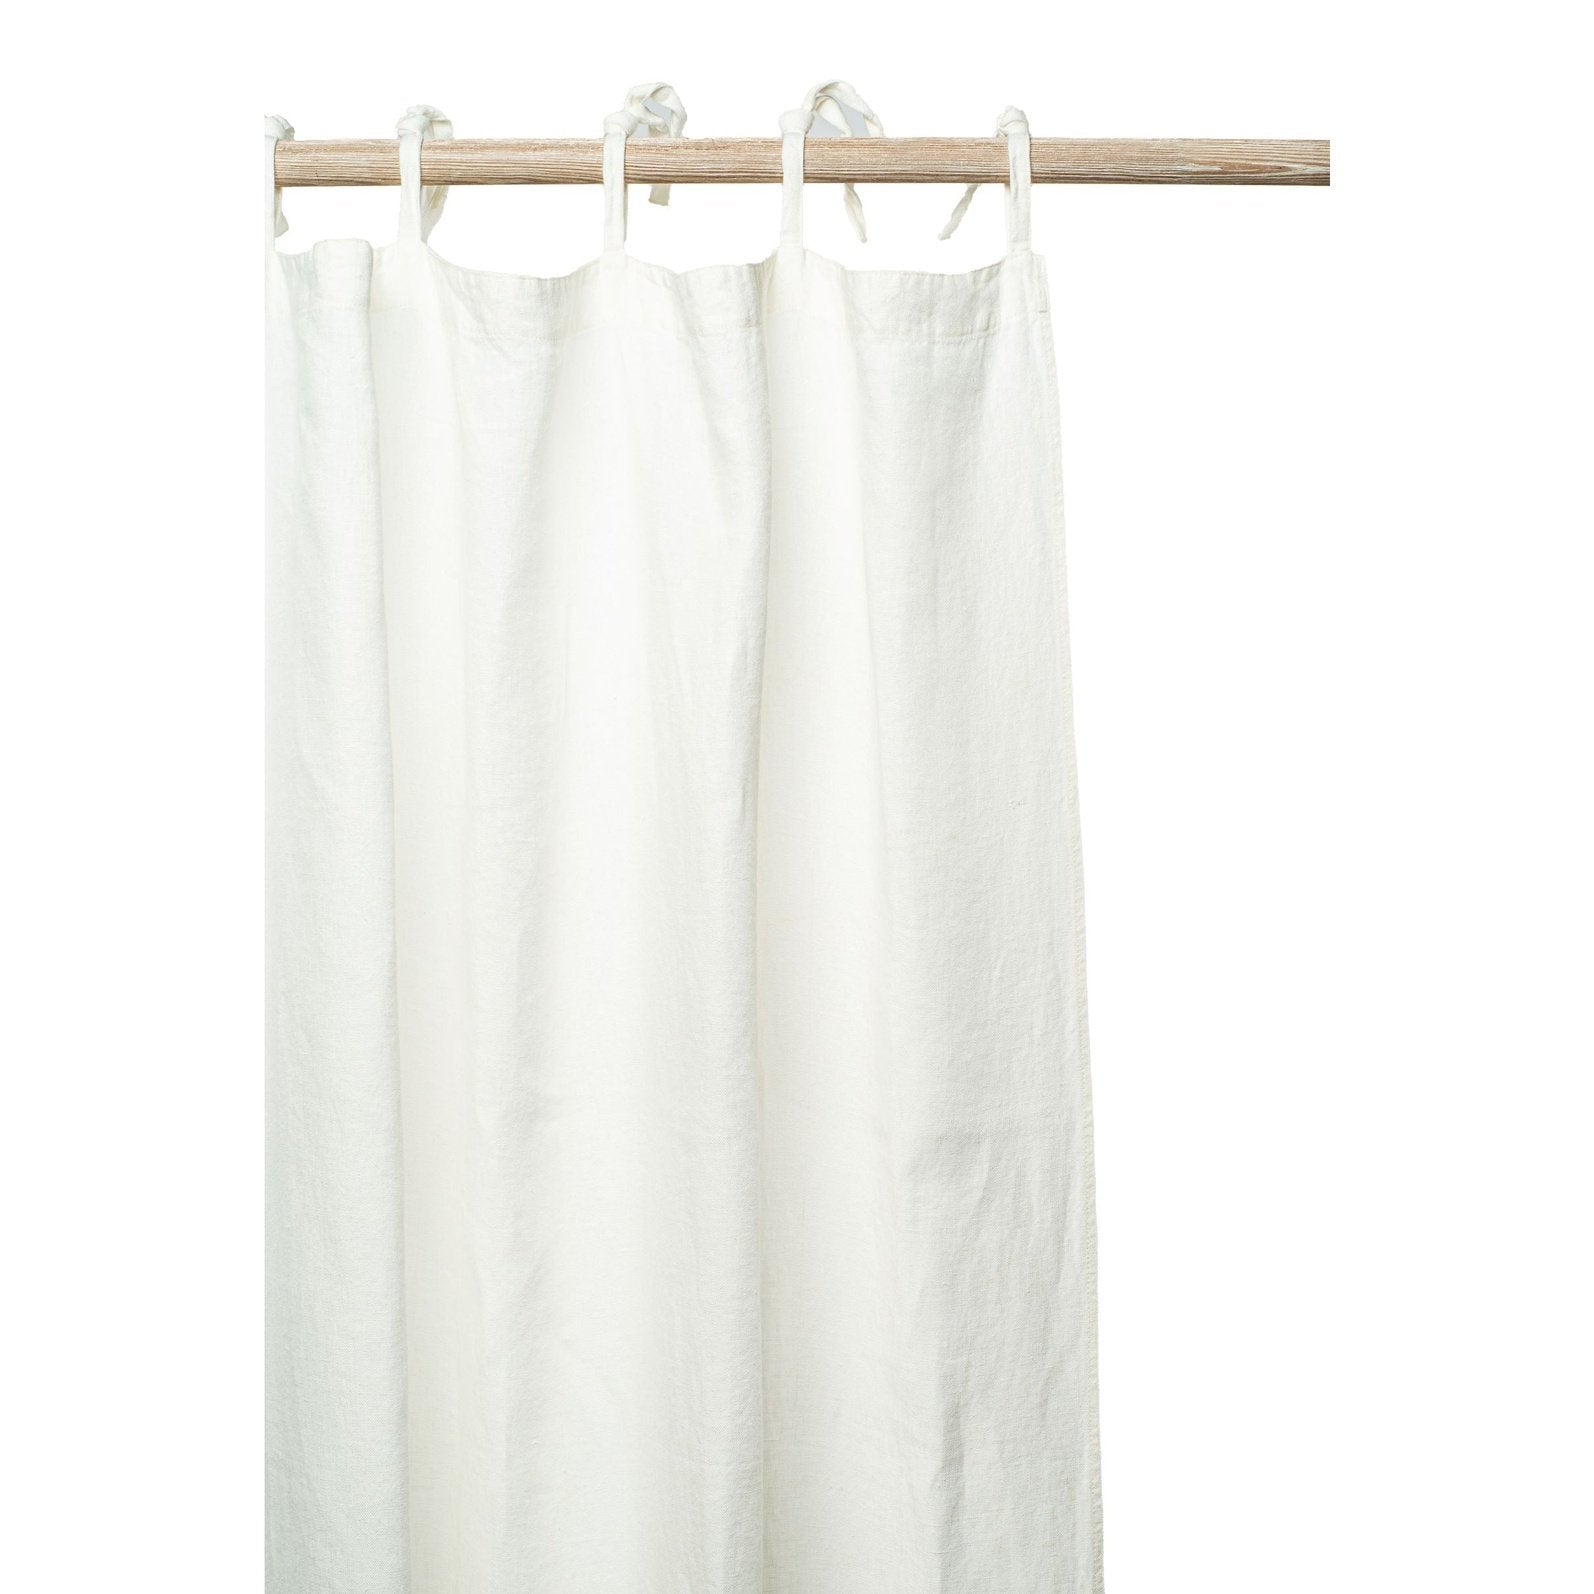 Emma Off White Washed Linen Curtain: Stonewashed texture adds warmth & depth to any space.